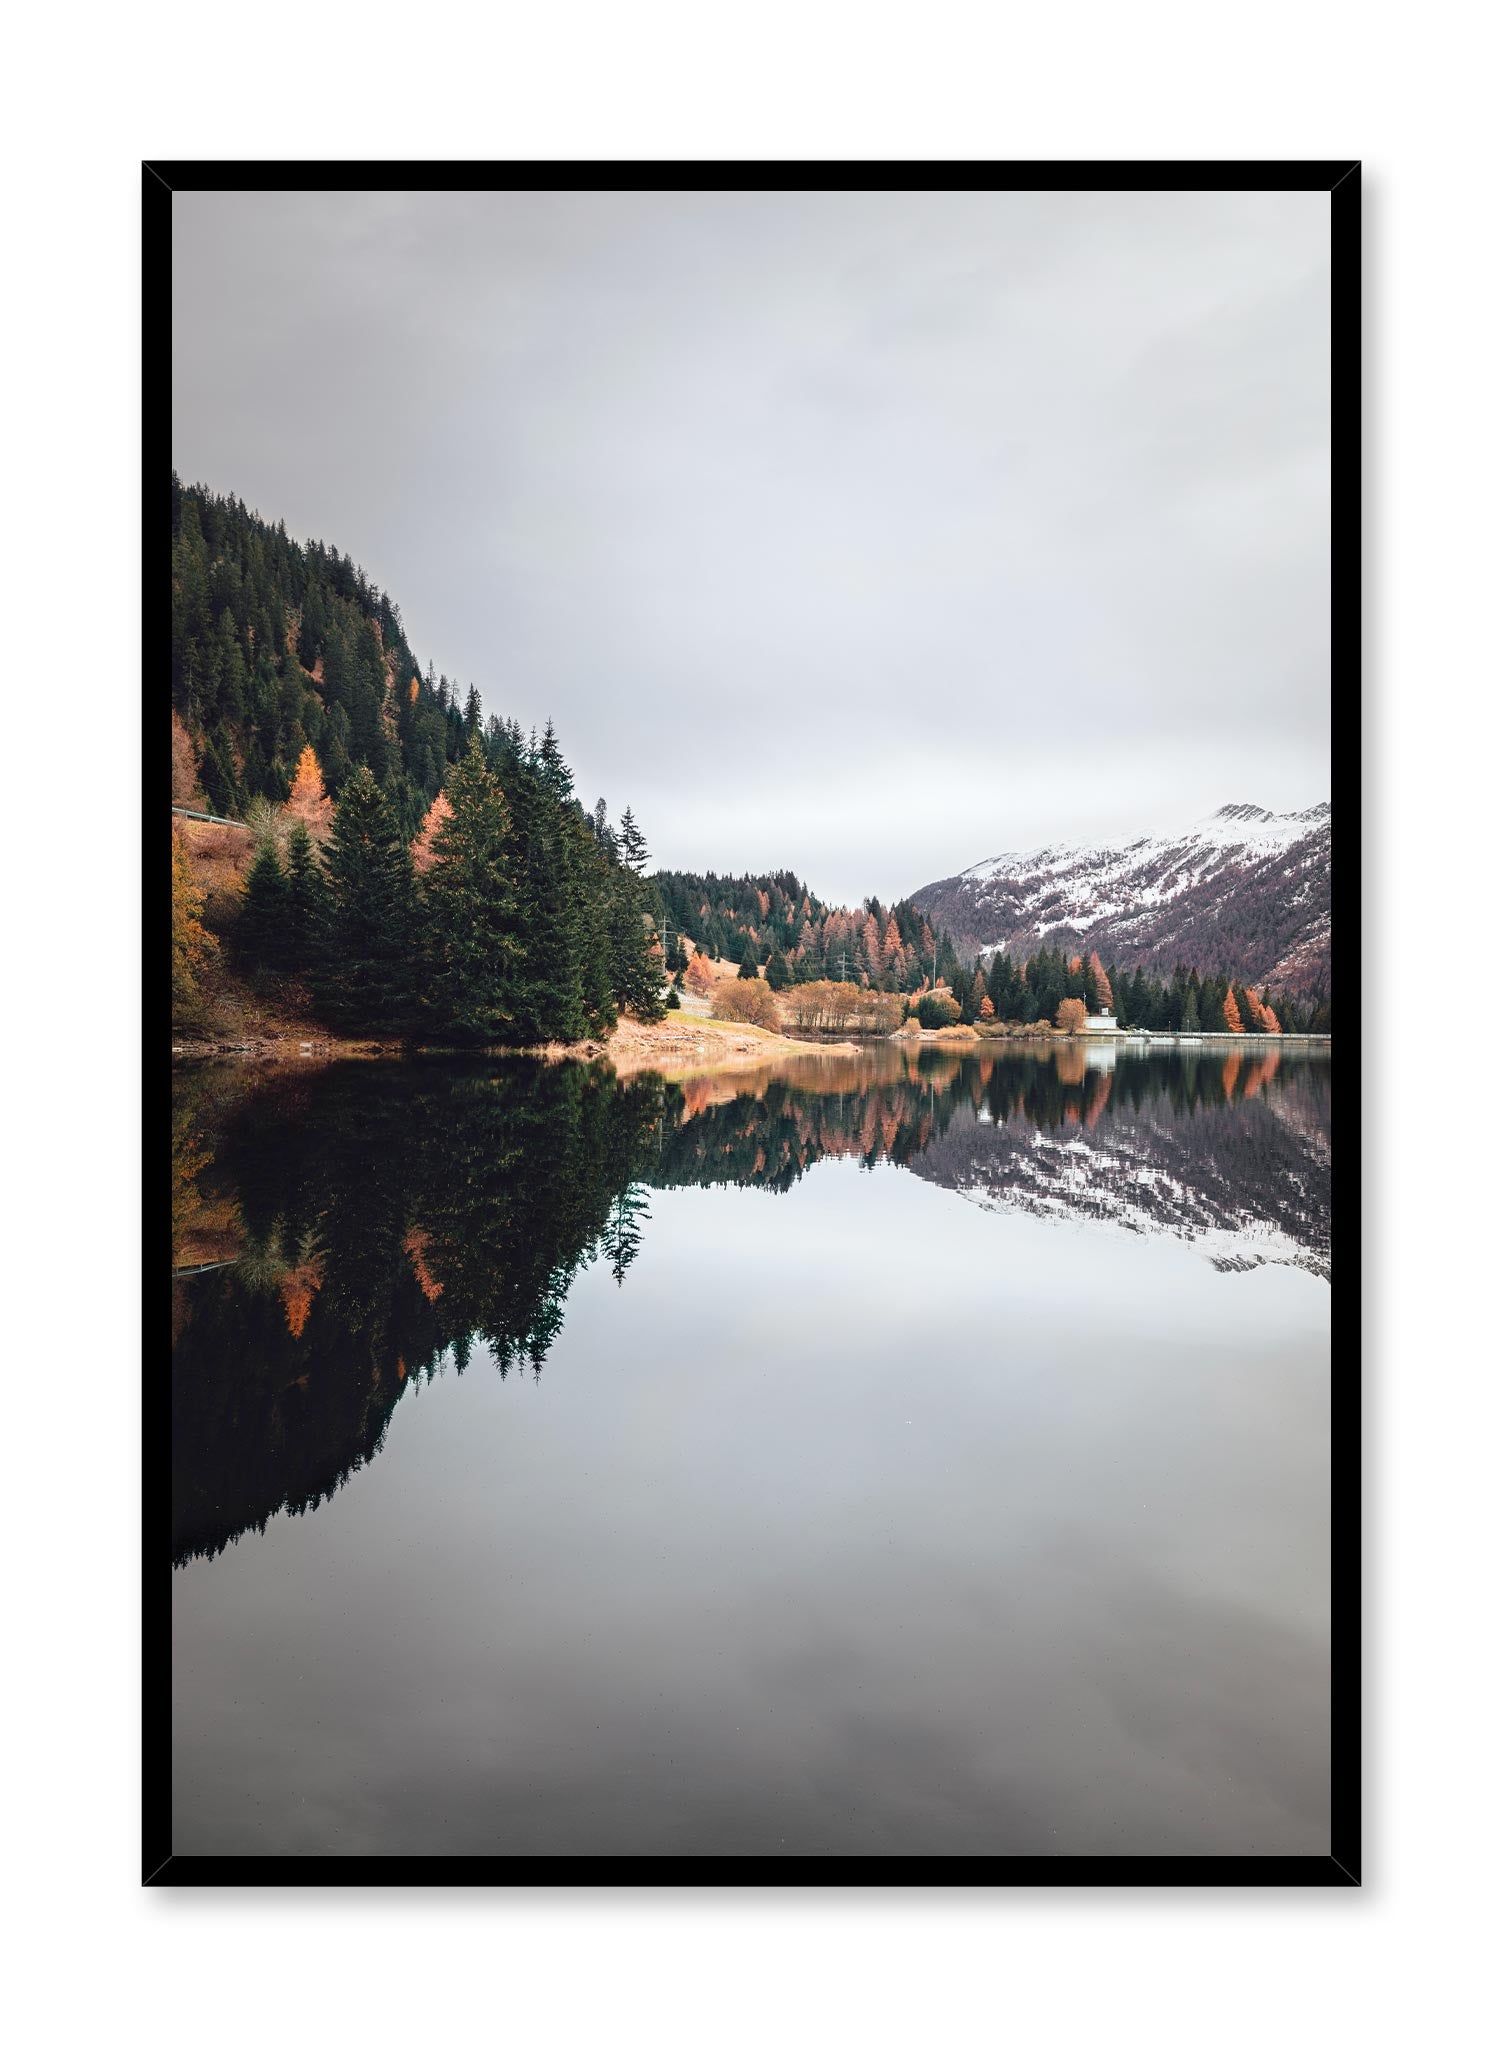 Peace & Quiet is a minimalist photography by Opposite Wall of the cloudy day view of one forest mountain and one snowy mountain mirrored over a river.